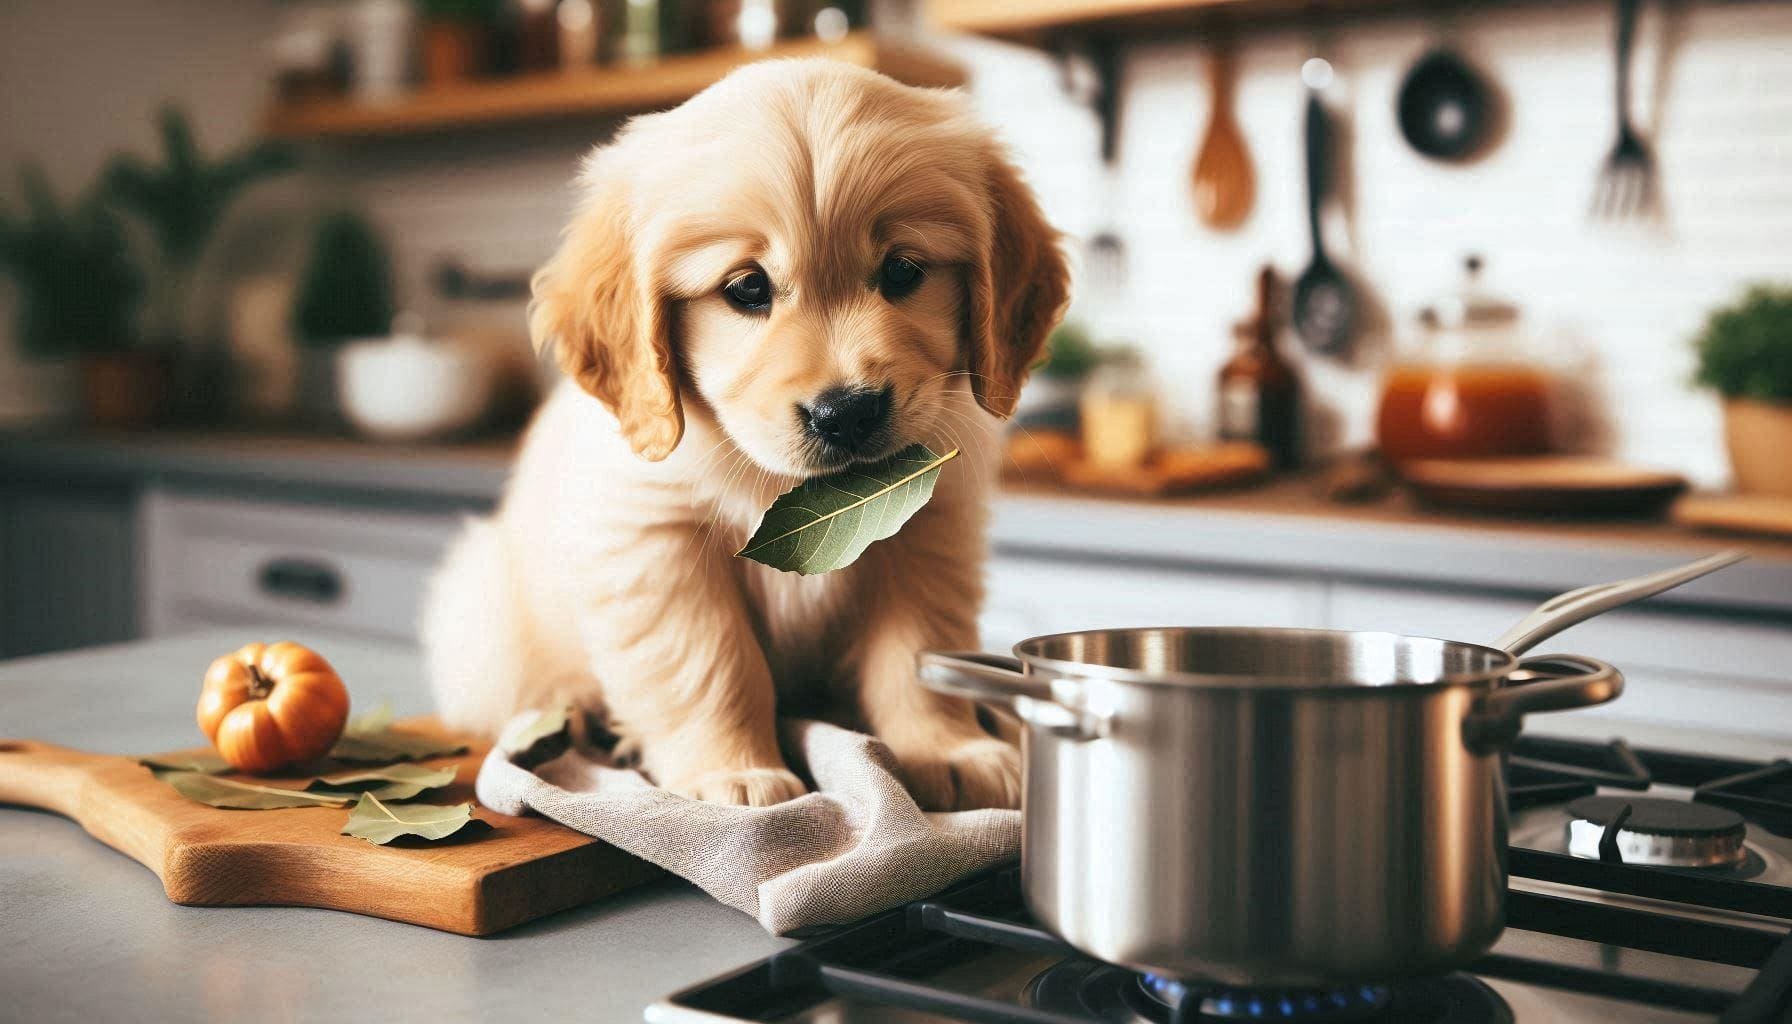 Can Dogs Eat Bay Leaves?